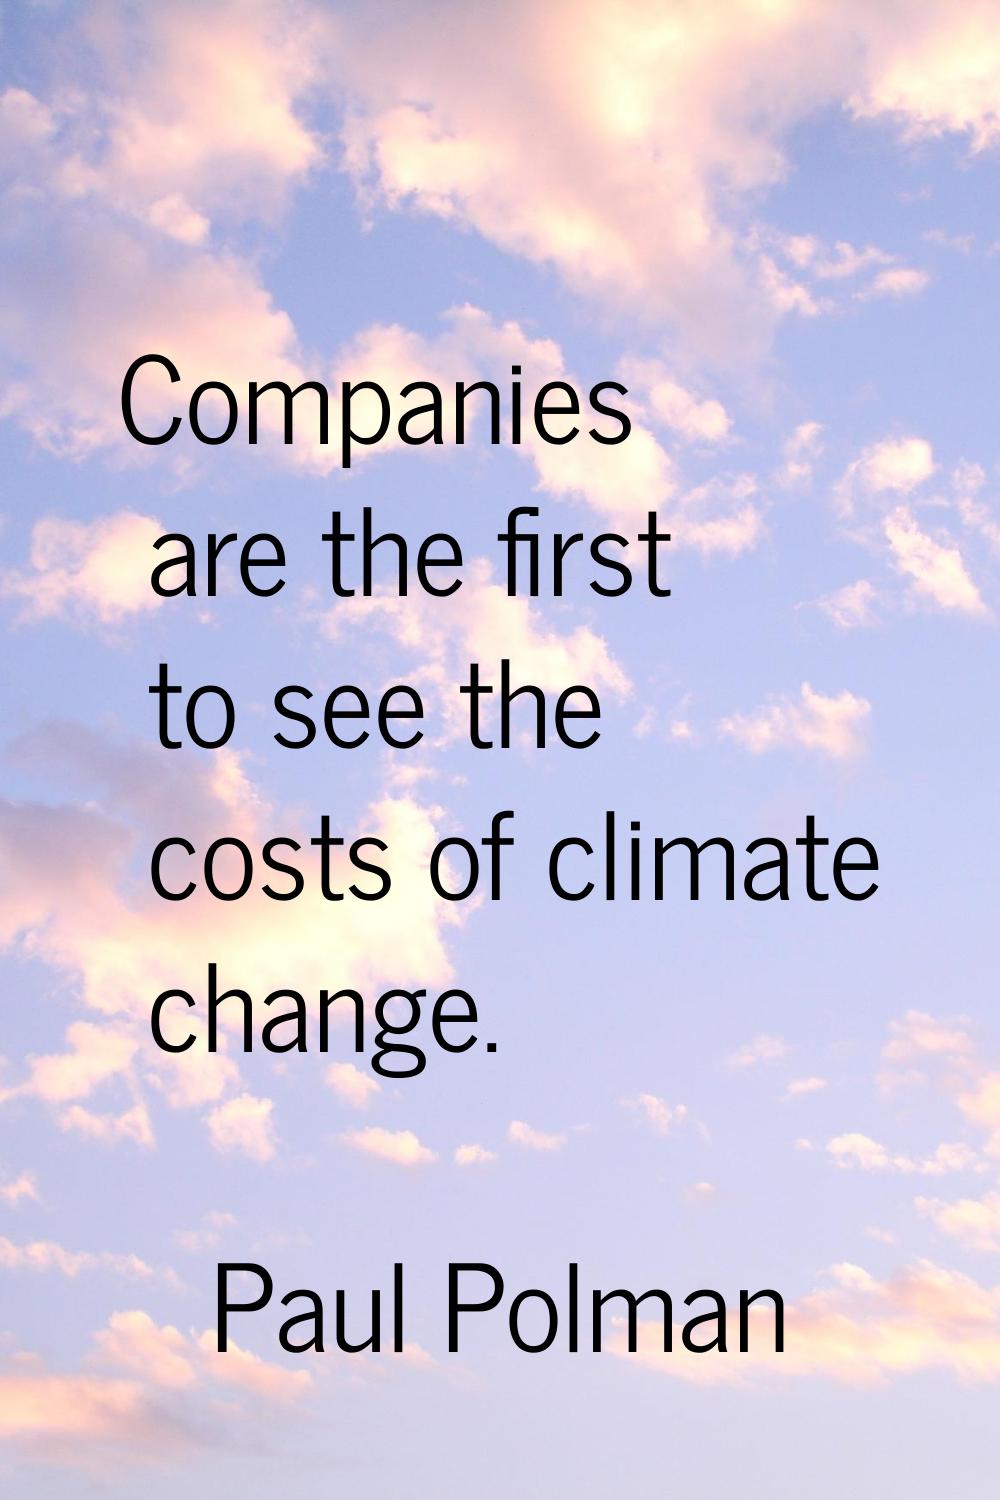 Companies are the first to see the costs of climate change.